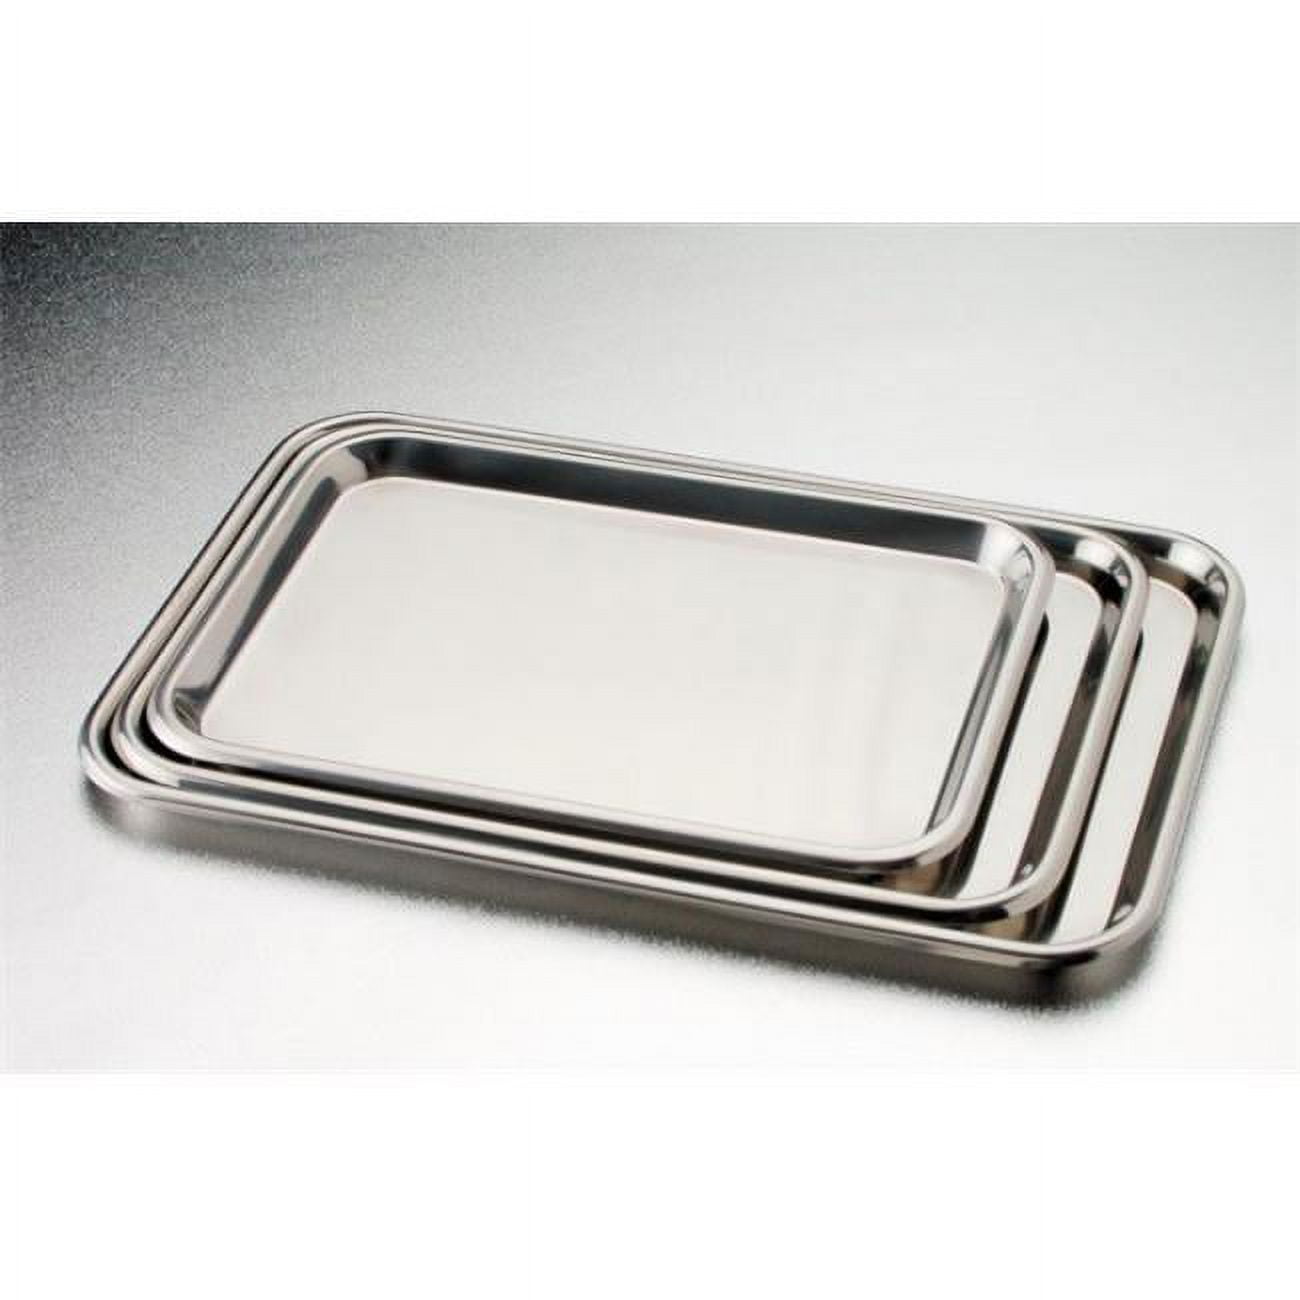 4263 17.125 X 11.625 X 0.625 In. Stainless Steel Instrument Flat Tray